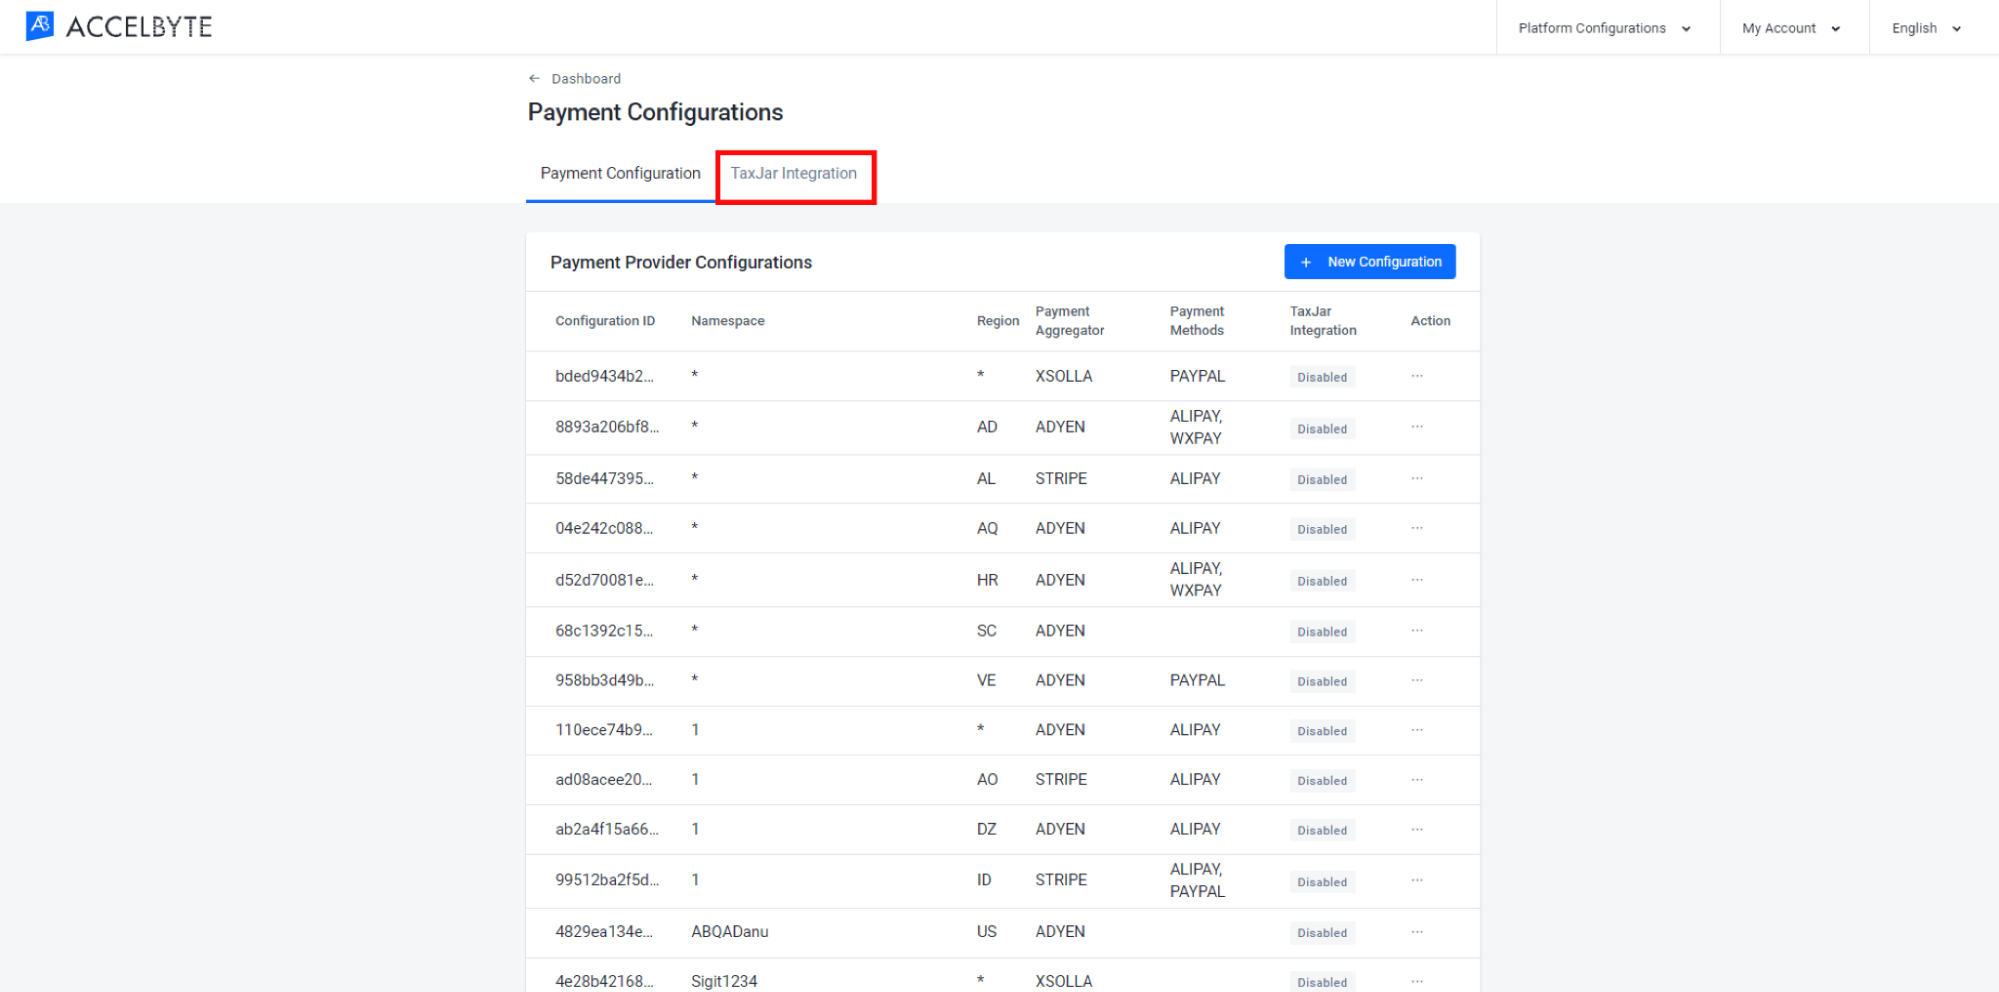 TaxJar integration tab on payment configuration page